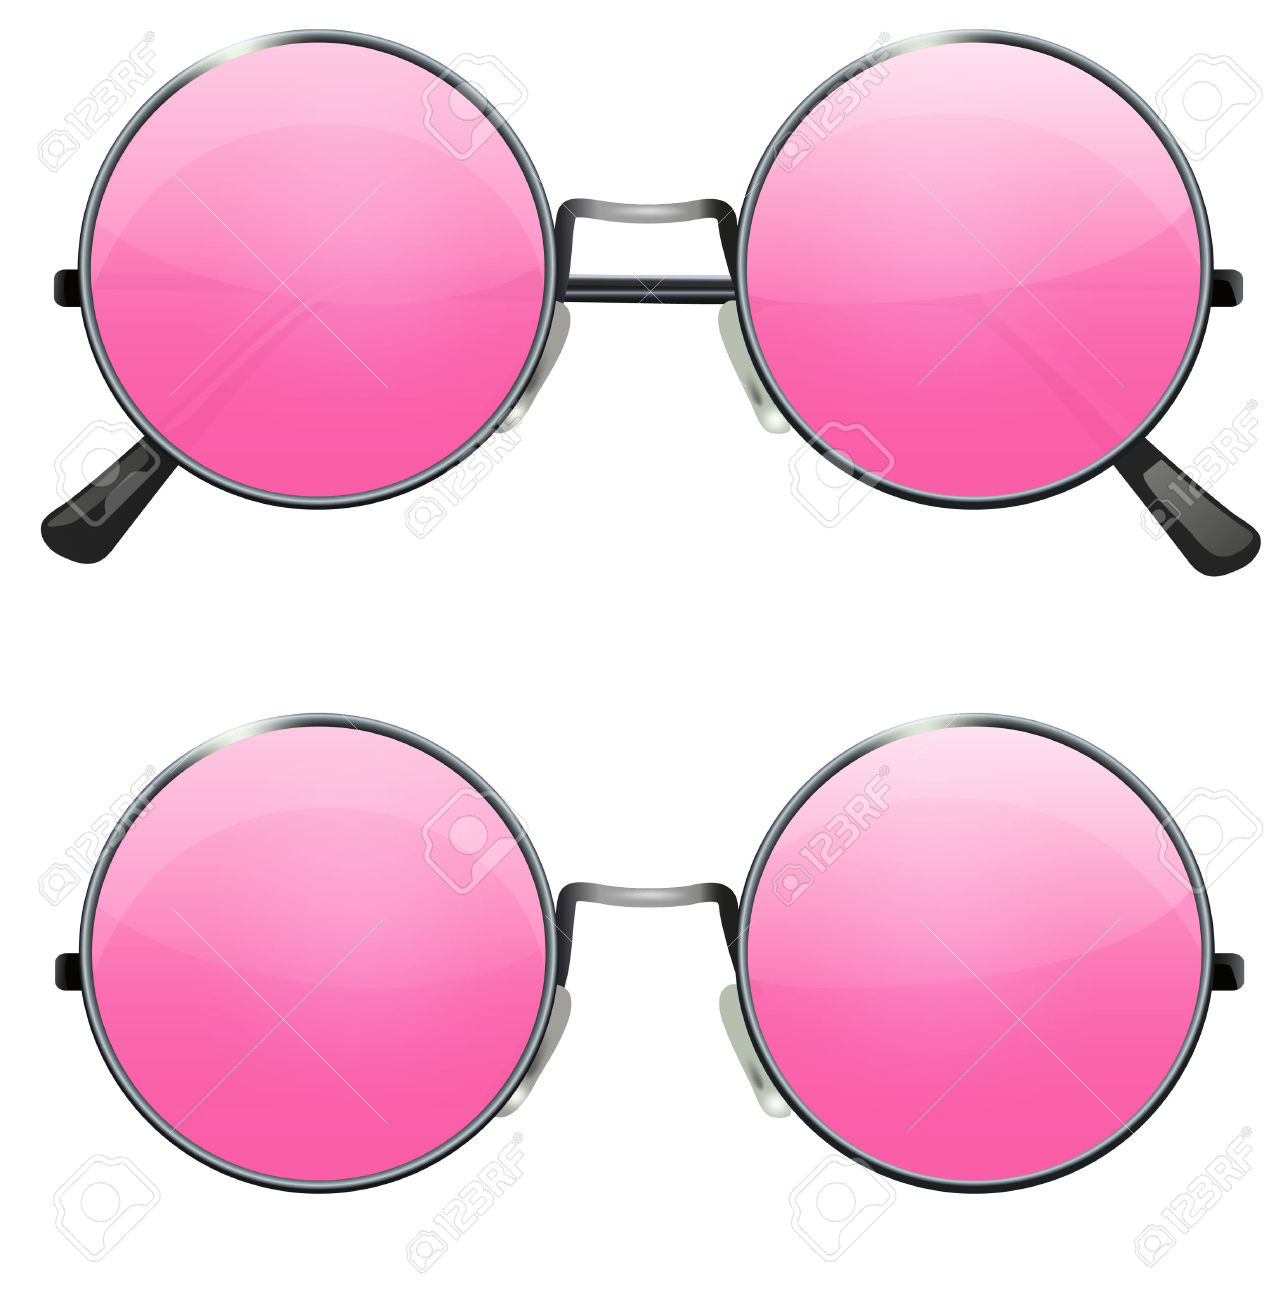 rose colored glasses clipart - photo #48